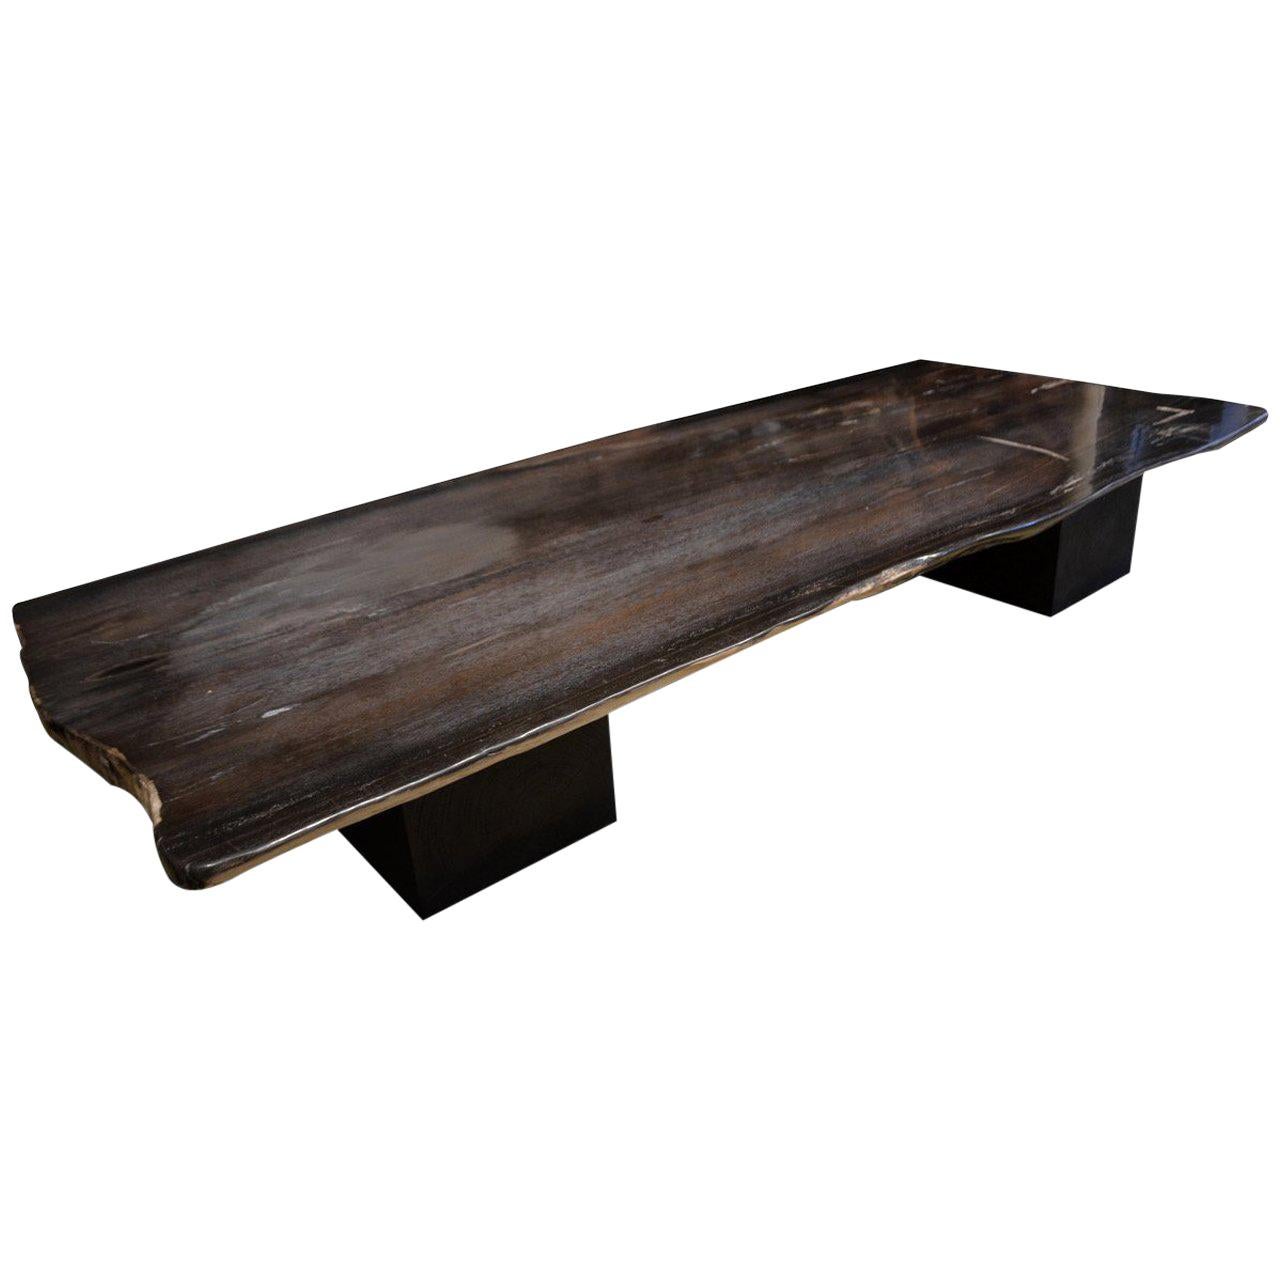 Andrianna Shamaris Super Smooth Petrified Wood Coffee Table or Dining Table